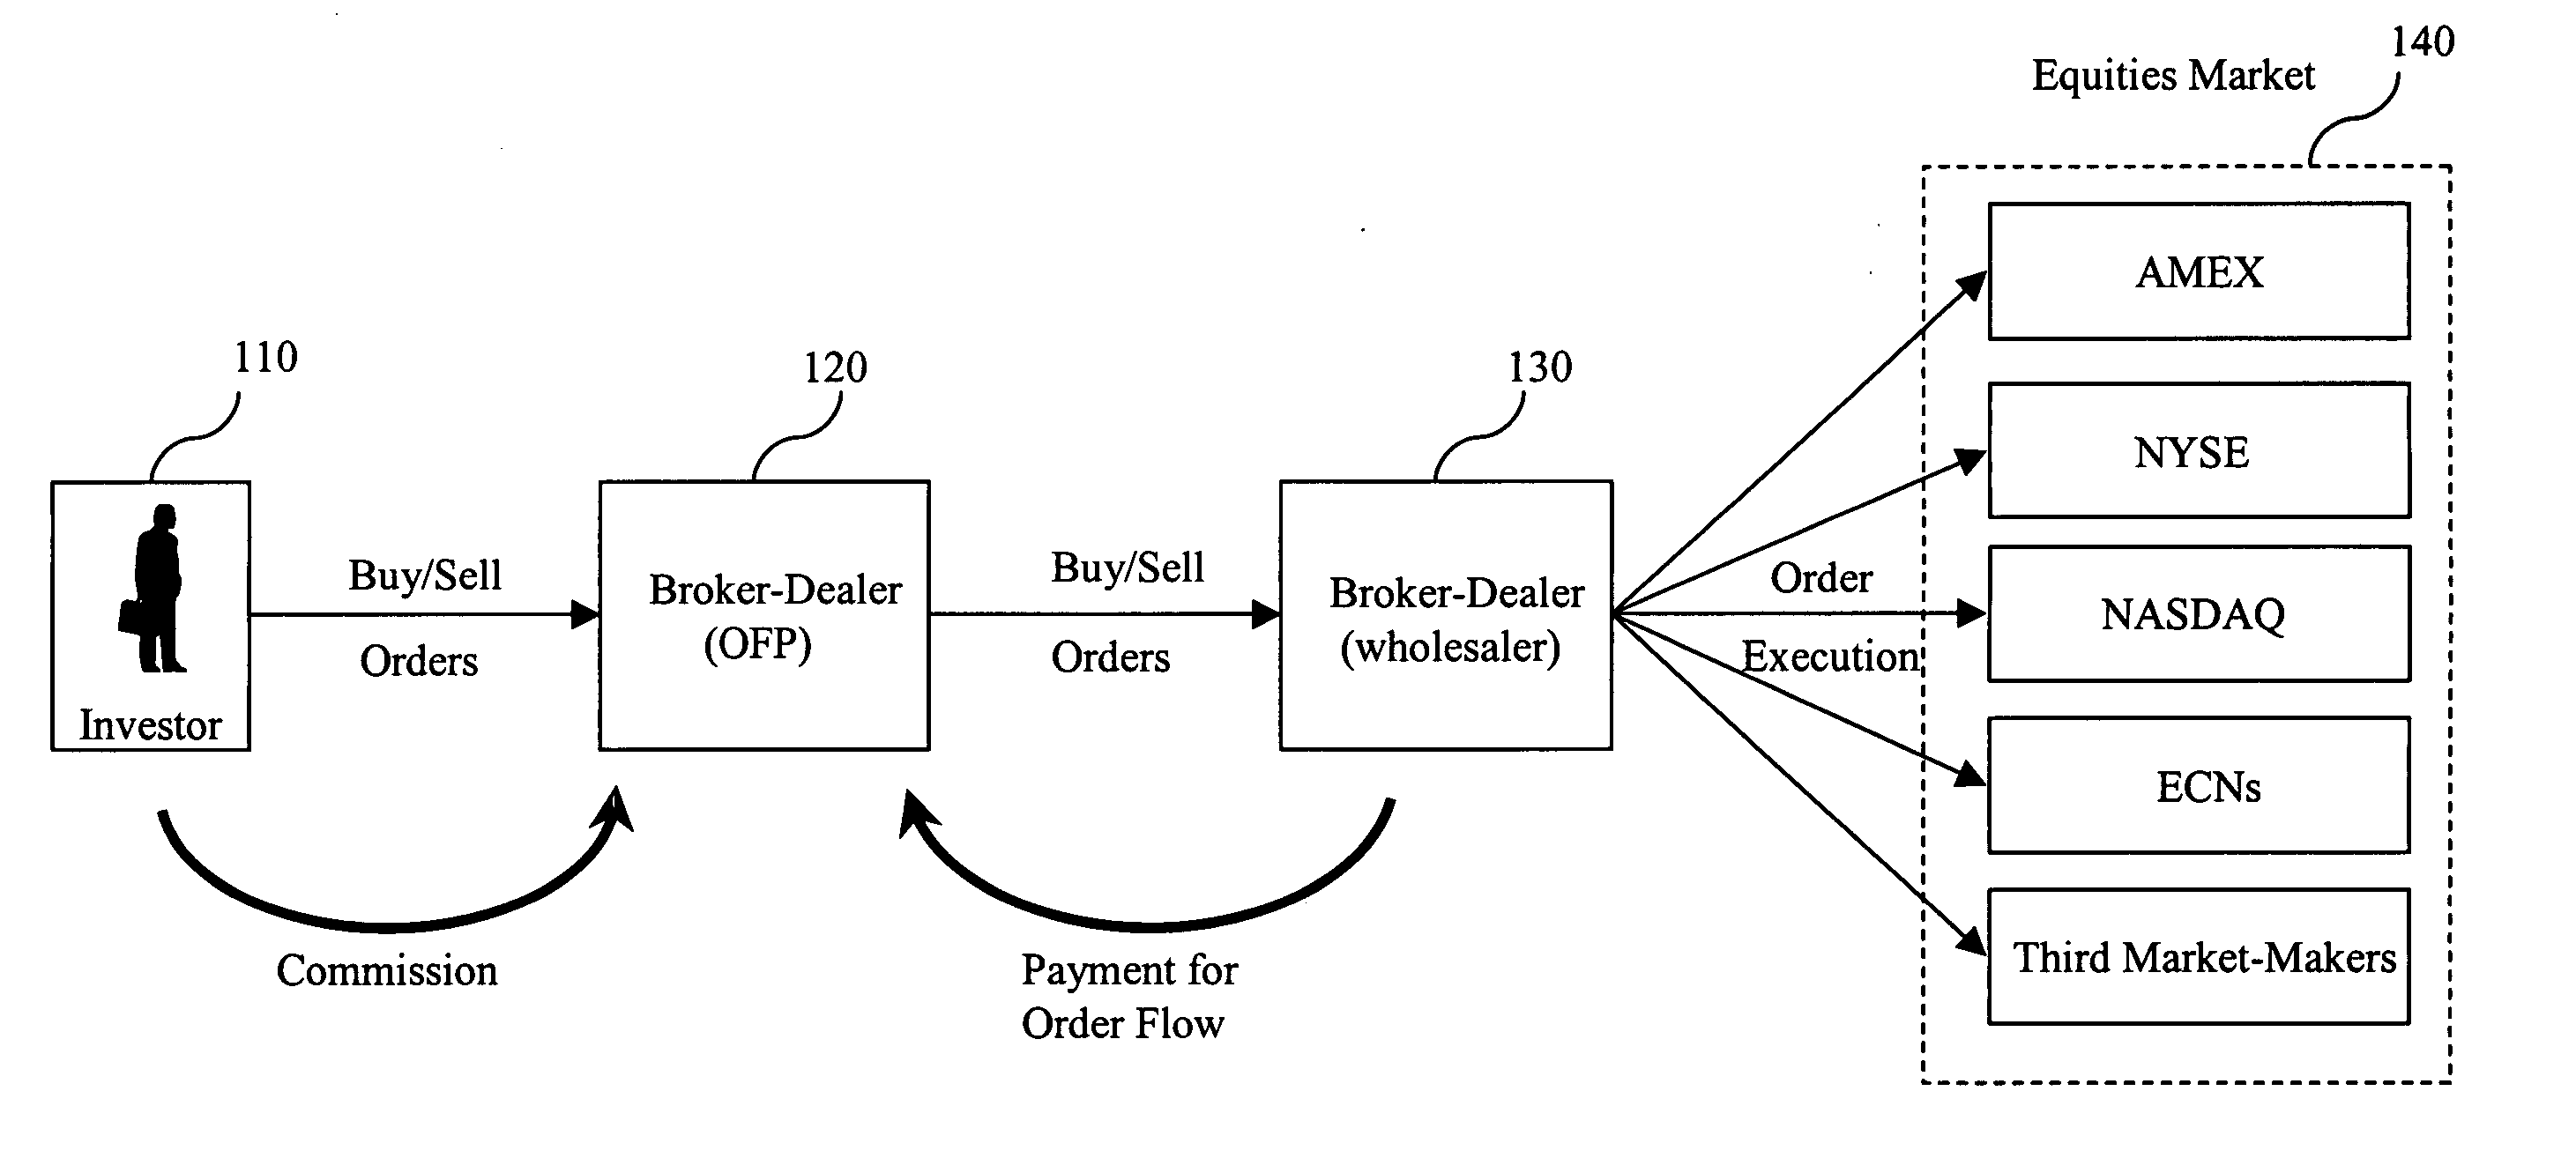 Computer implemented and/or assisted methods and systems for providing guaranteed, specified and/or predetermined execution prices in a guaranteed, specified and/or predetermined timeframe on the purchase or sale of, for example, listed options